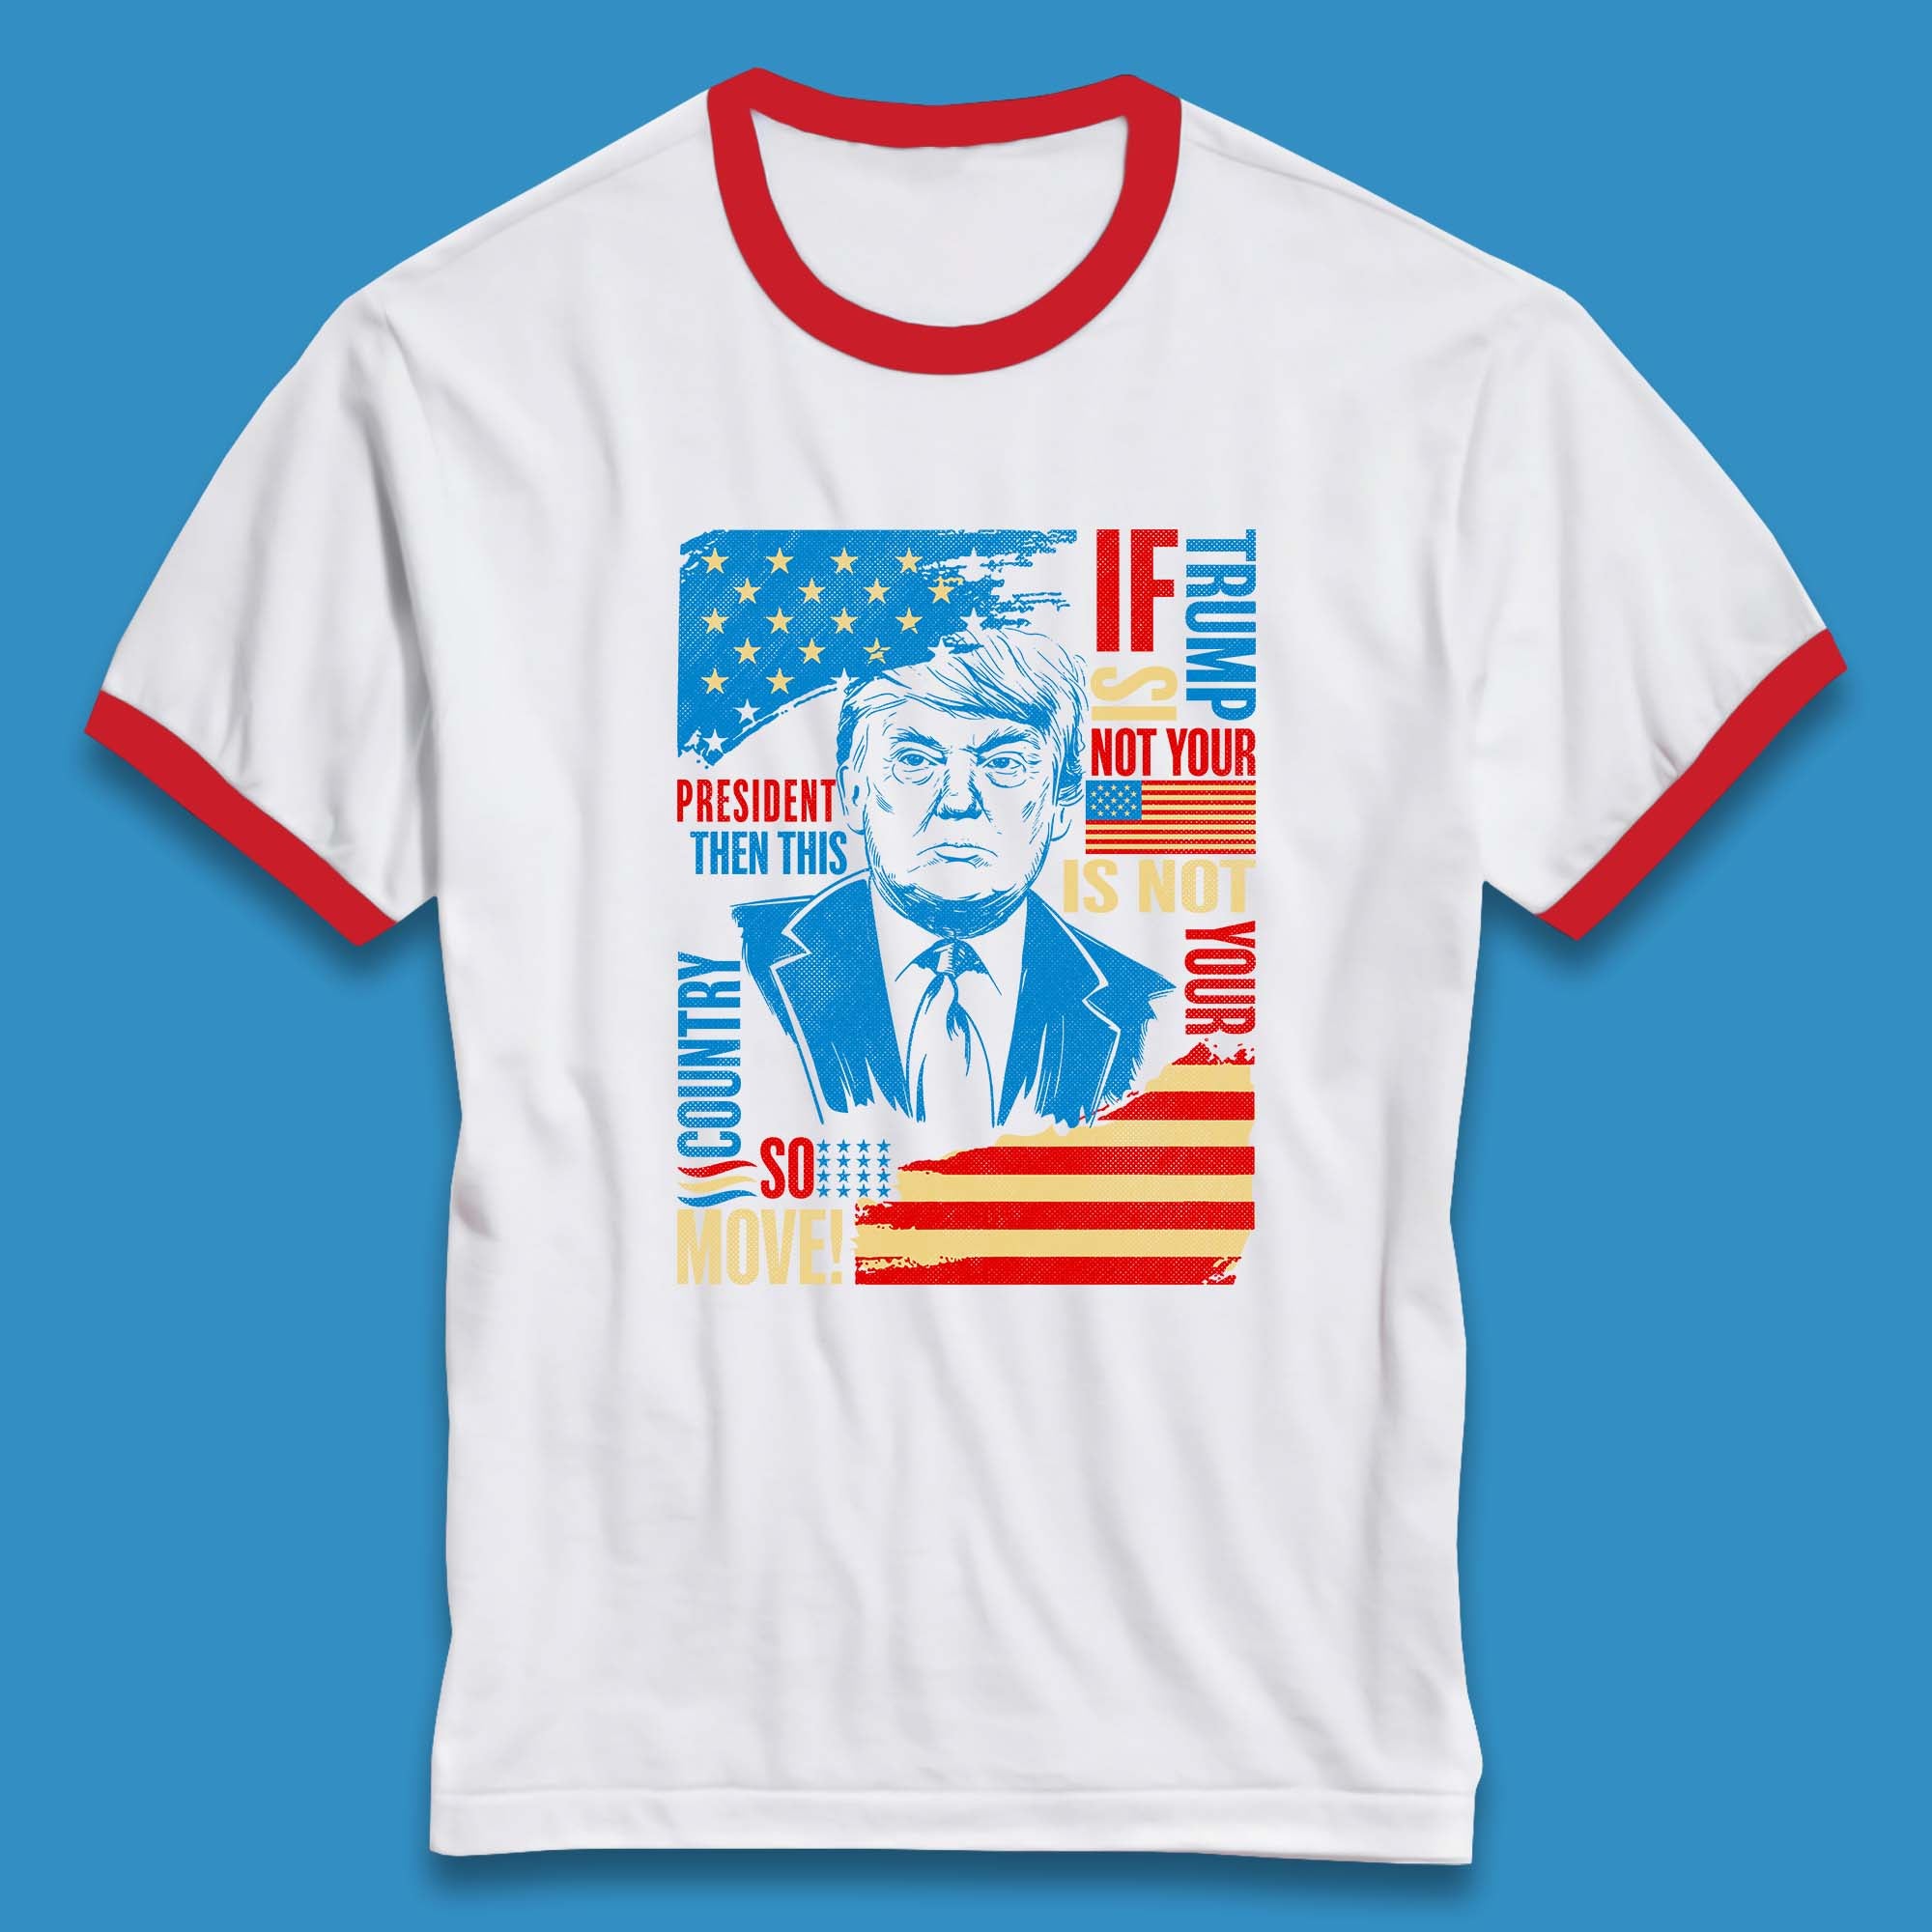 If Trump Is Not Your President Then This Is Not Your Country So Move President Election Republicans Campaign Ringer T Shirt